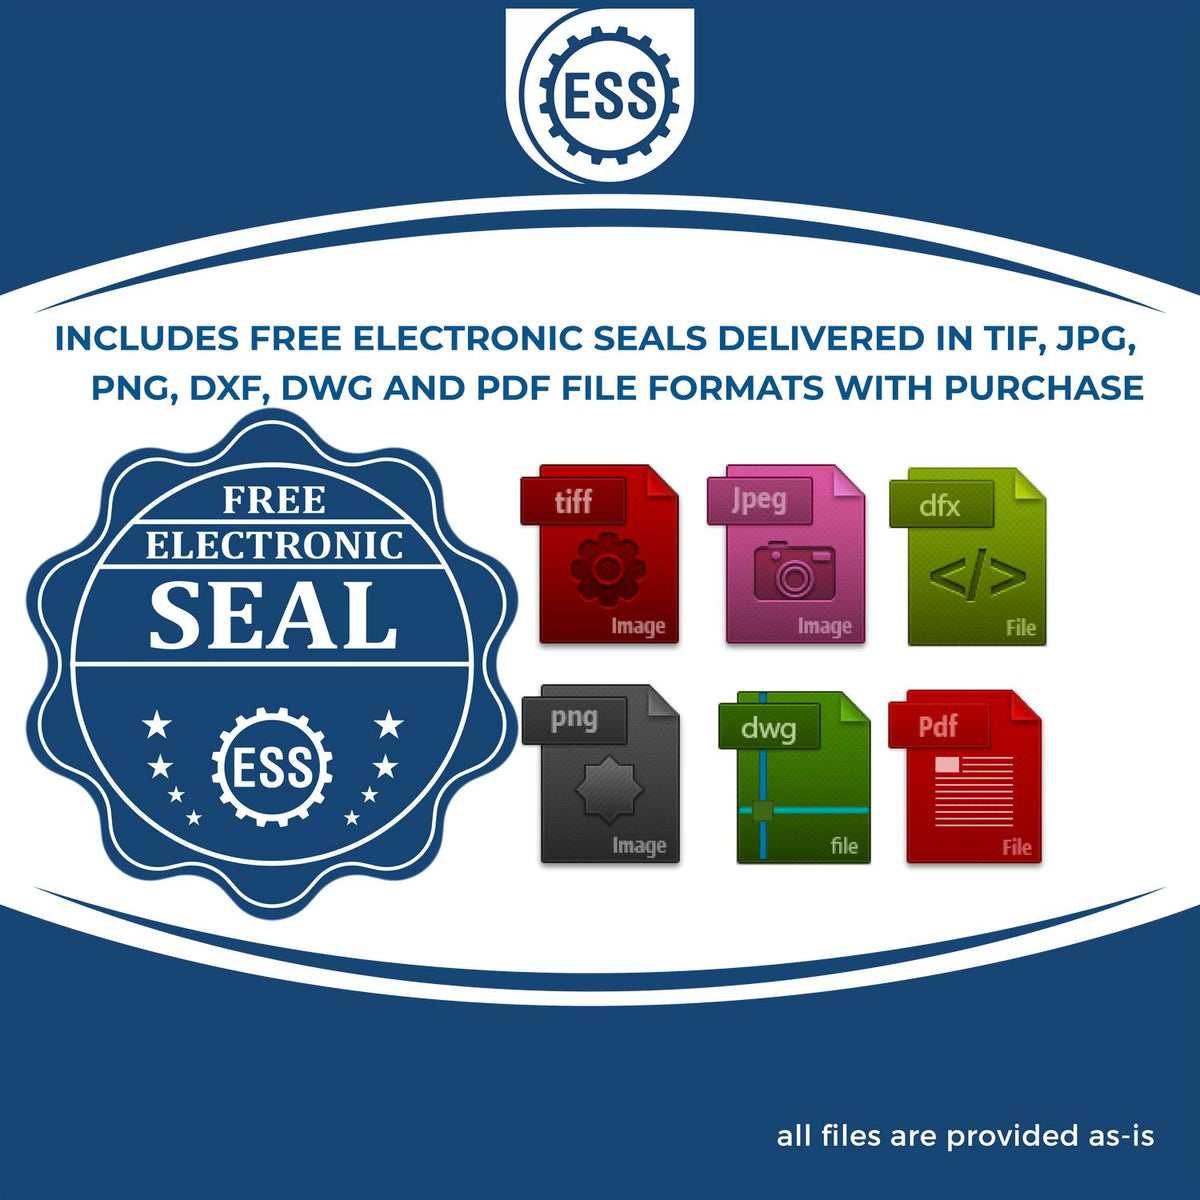 An infographic for the free electronic seal for the Gift West Virginia Engineer Seal illustrating the different file type icons such as DXF, DWG, TIF, JPG and PNG.